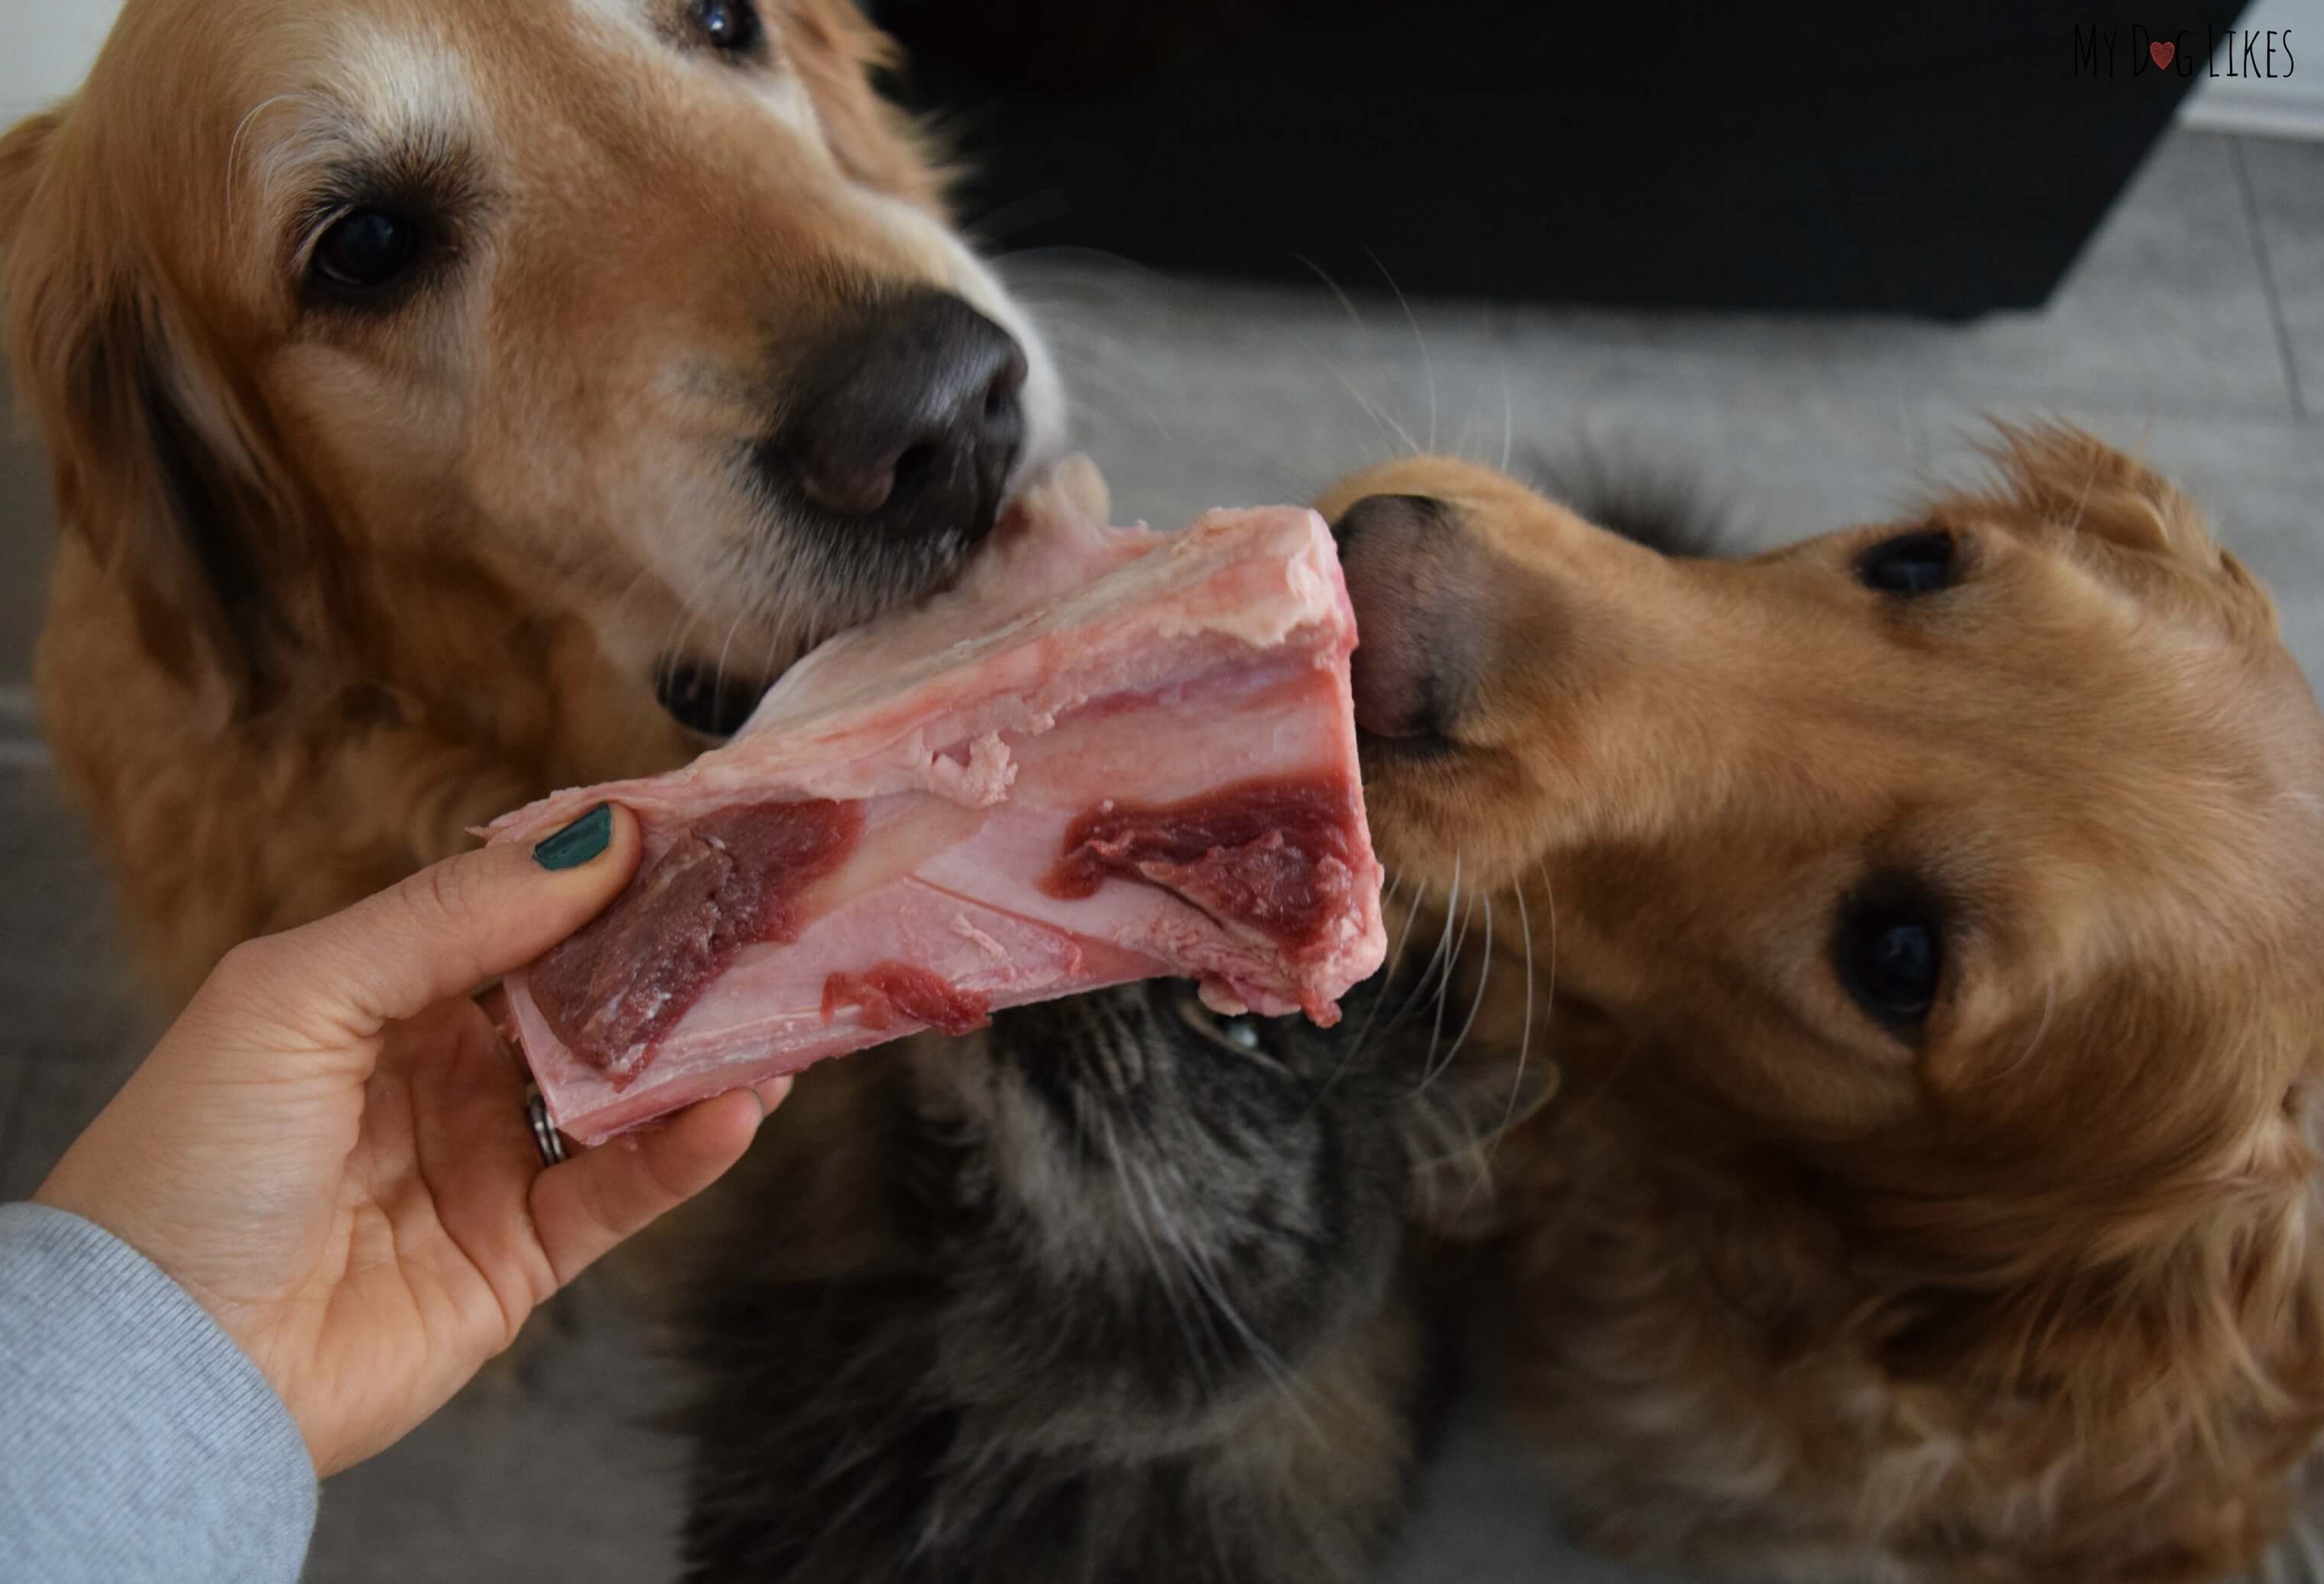 are dog chewing bones bad for them